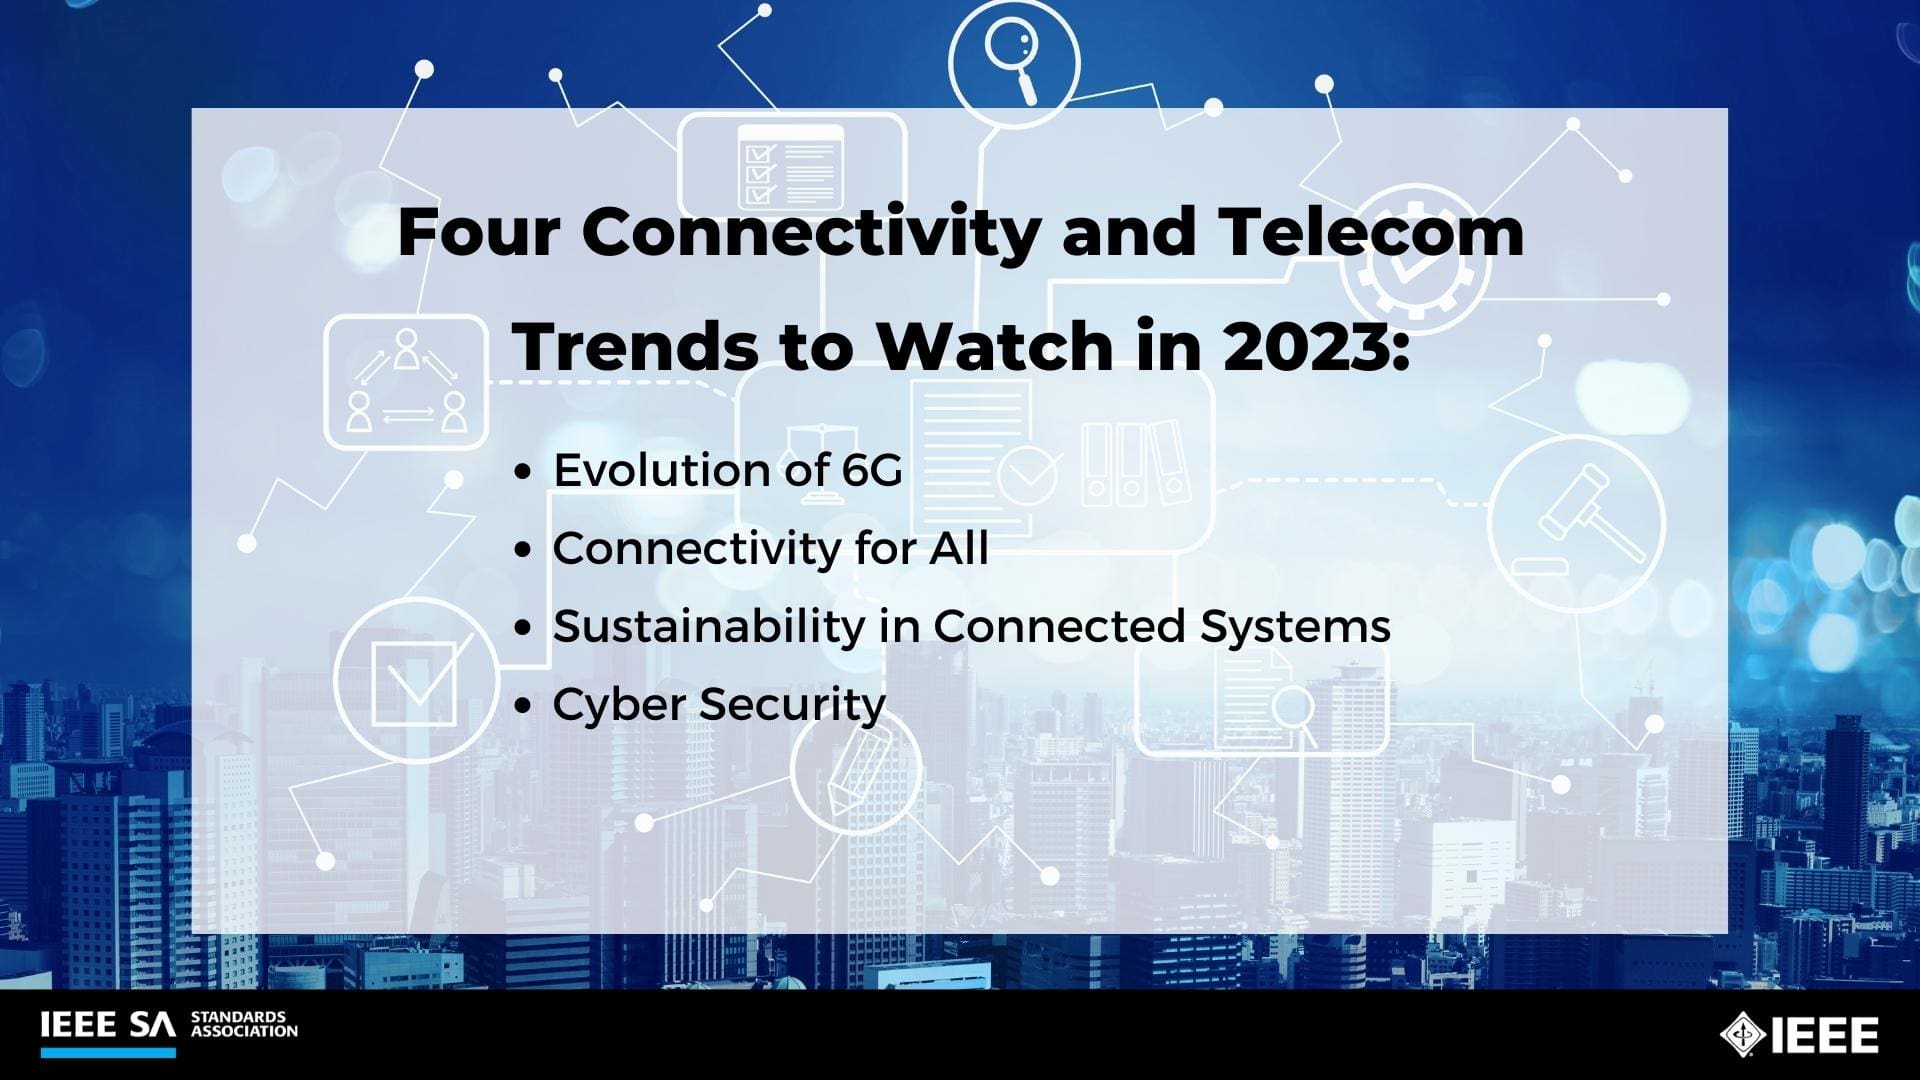 Four Connectivity and Telecom Trends to Watch in 2023: Evolution of 6G; Connectivity for All; Sustainability in Connected Systems; Cyber Security